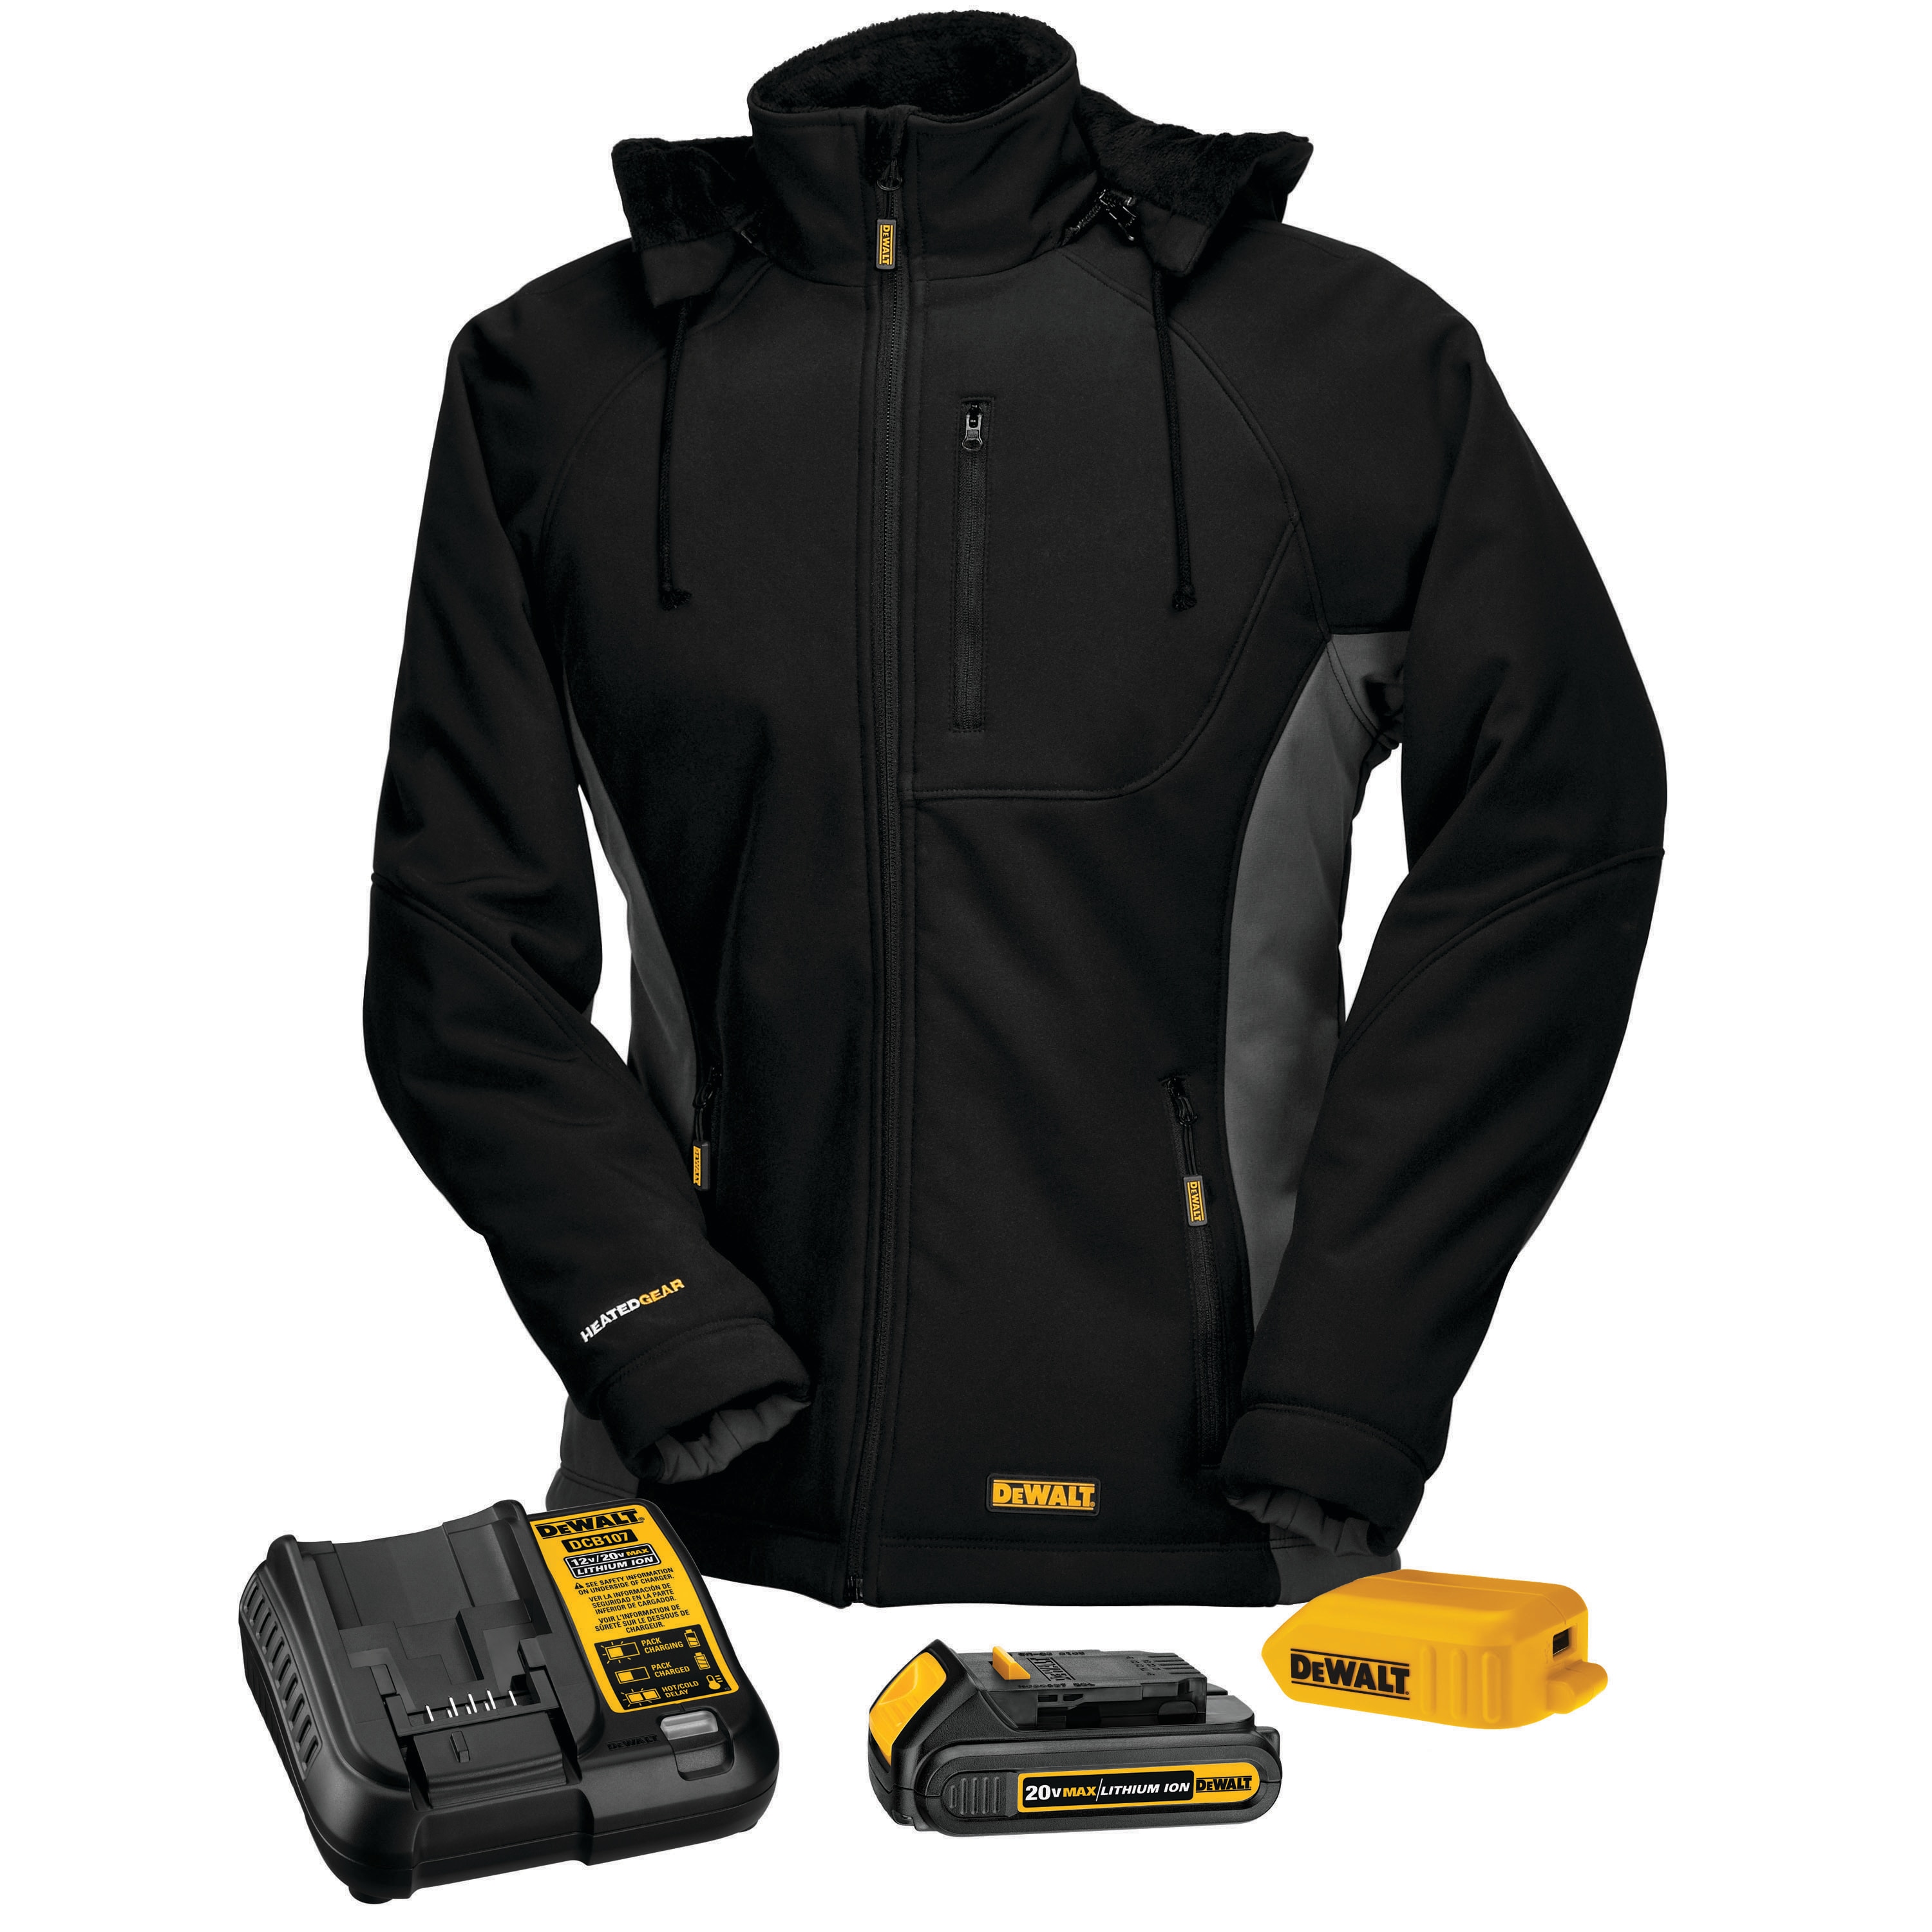 USB Powered Heating Vest For Style & Warmth - Inspire Uplift